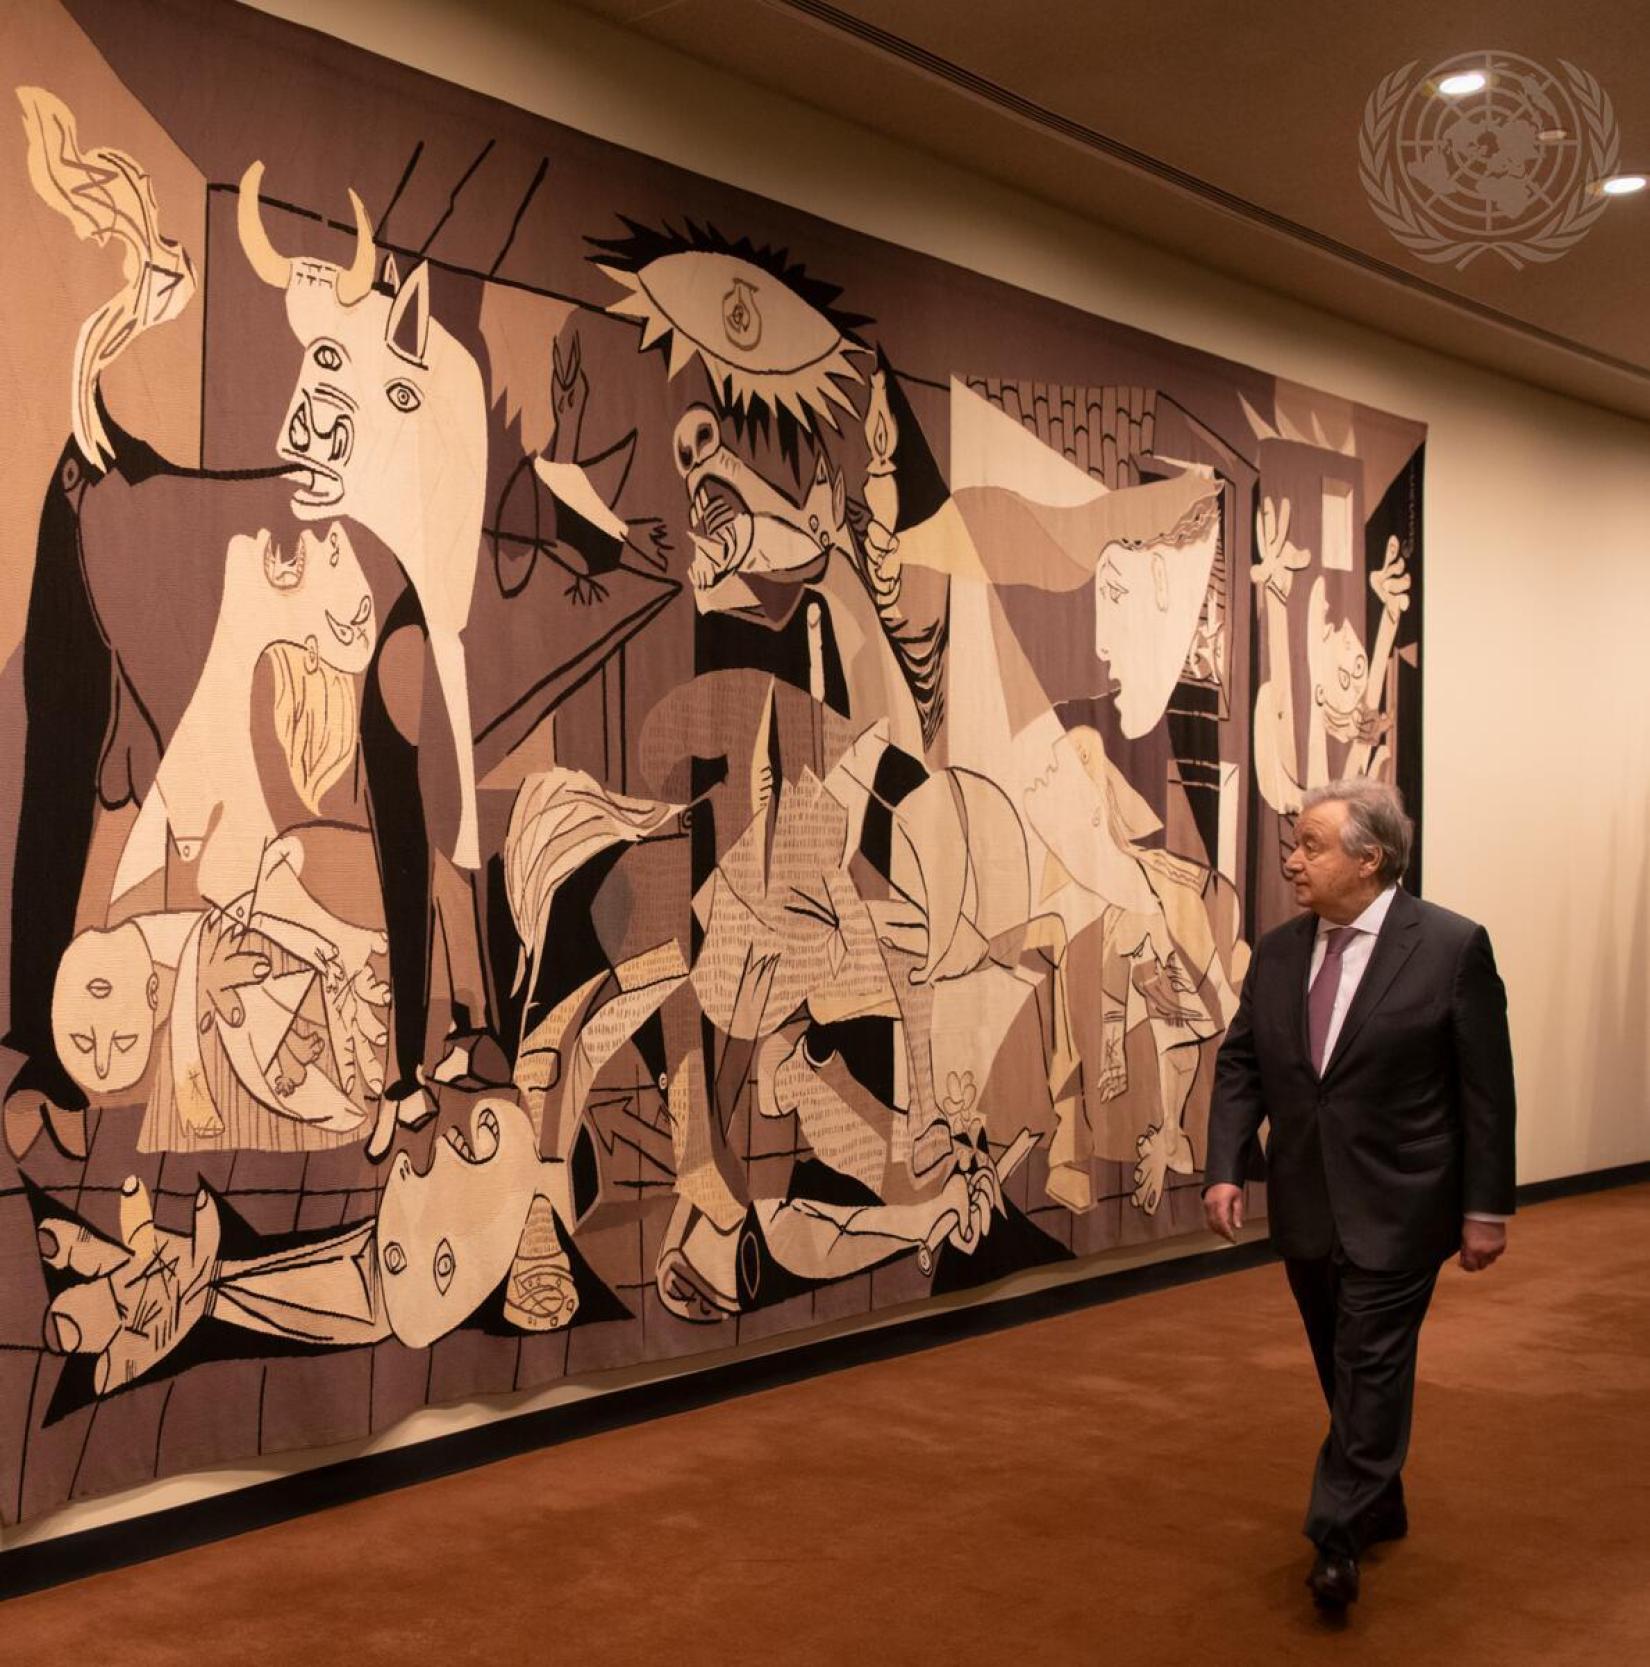 Picasso's Guernica tapestry returns to the United Nations | United Nations in I.R. Iran